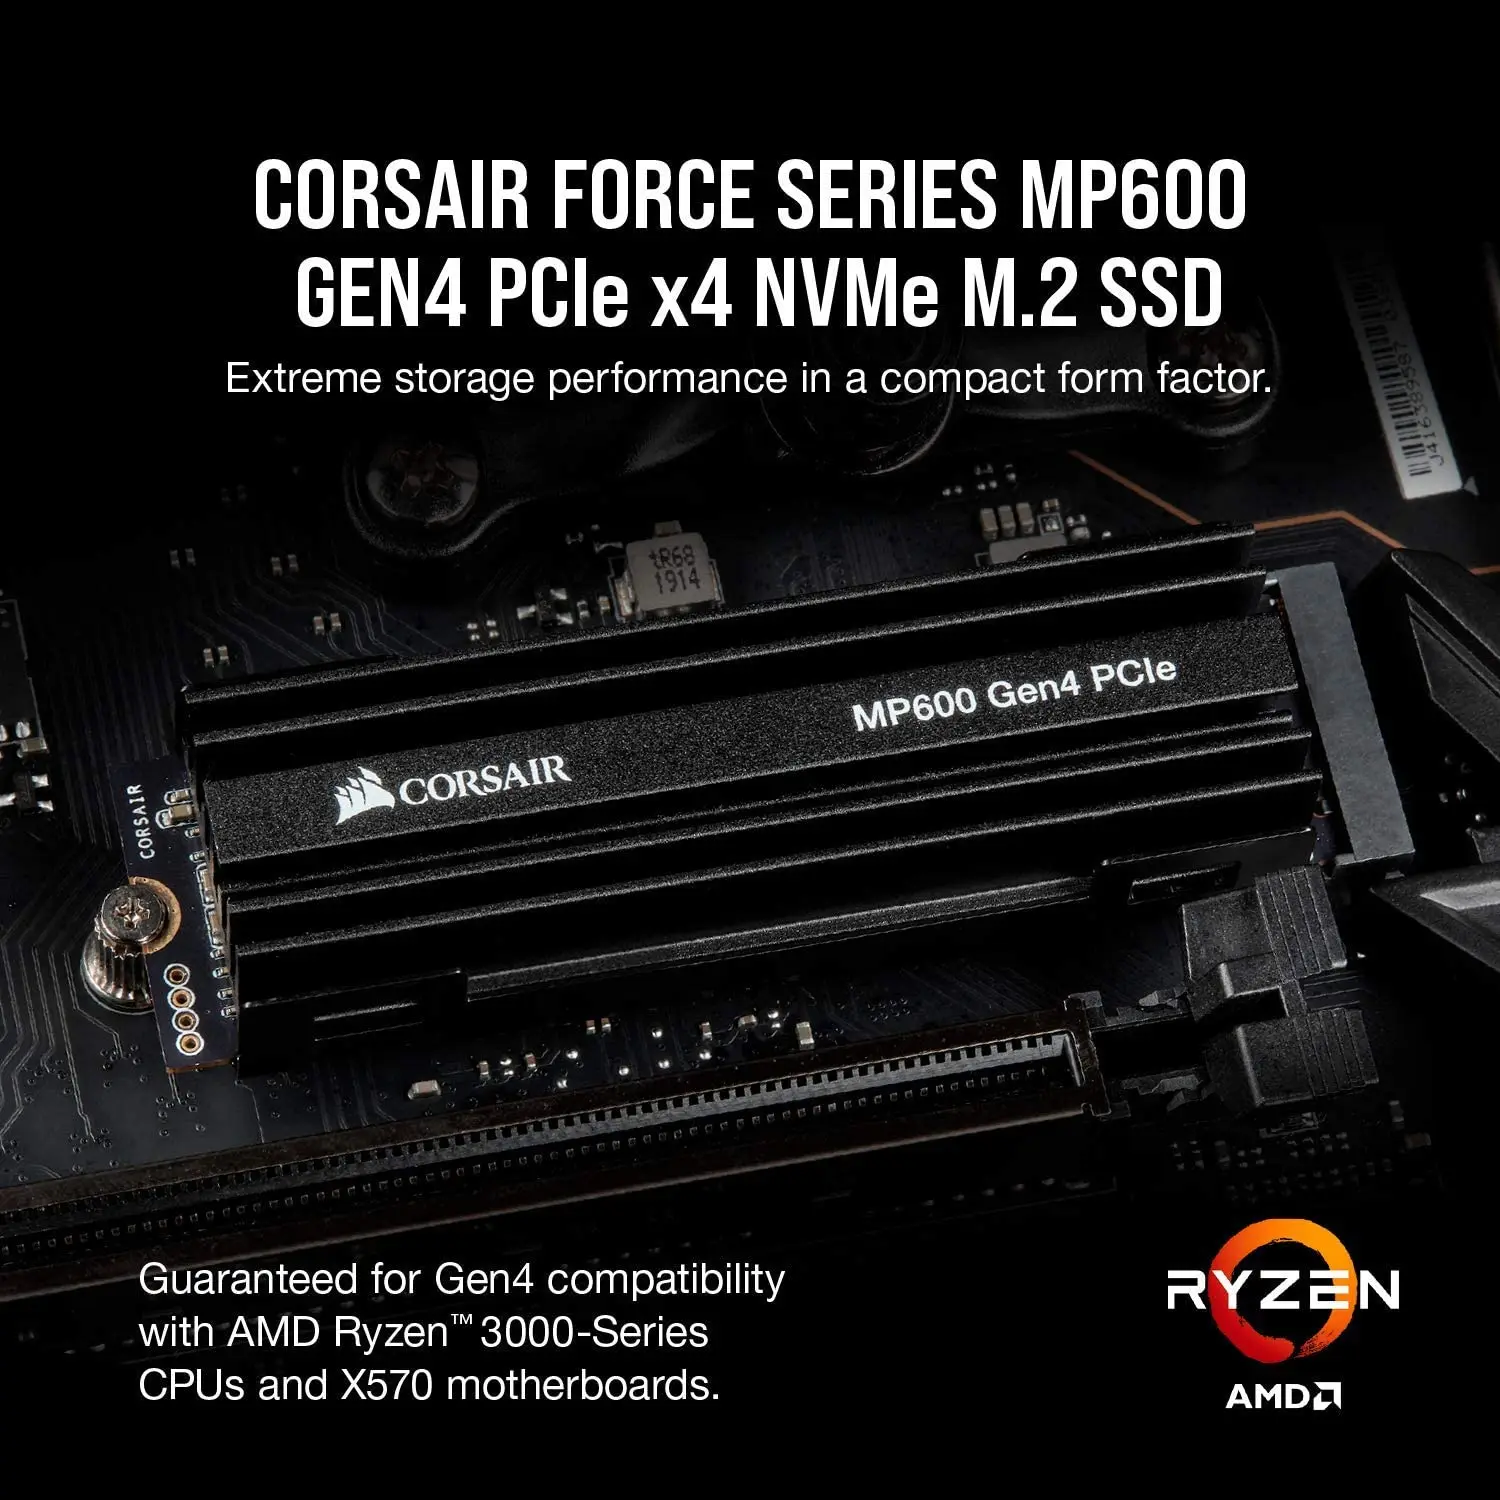 Tilsætningsstof i gang sfære Corsair Mp600 2tb Nvme Gen4 Pcie X4 M.2 22800 Ssd, Up To 4,950 Mb/s Sliod  State Drive - Solid State Drives - AliExpress